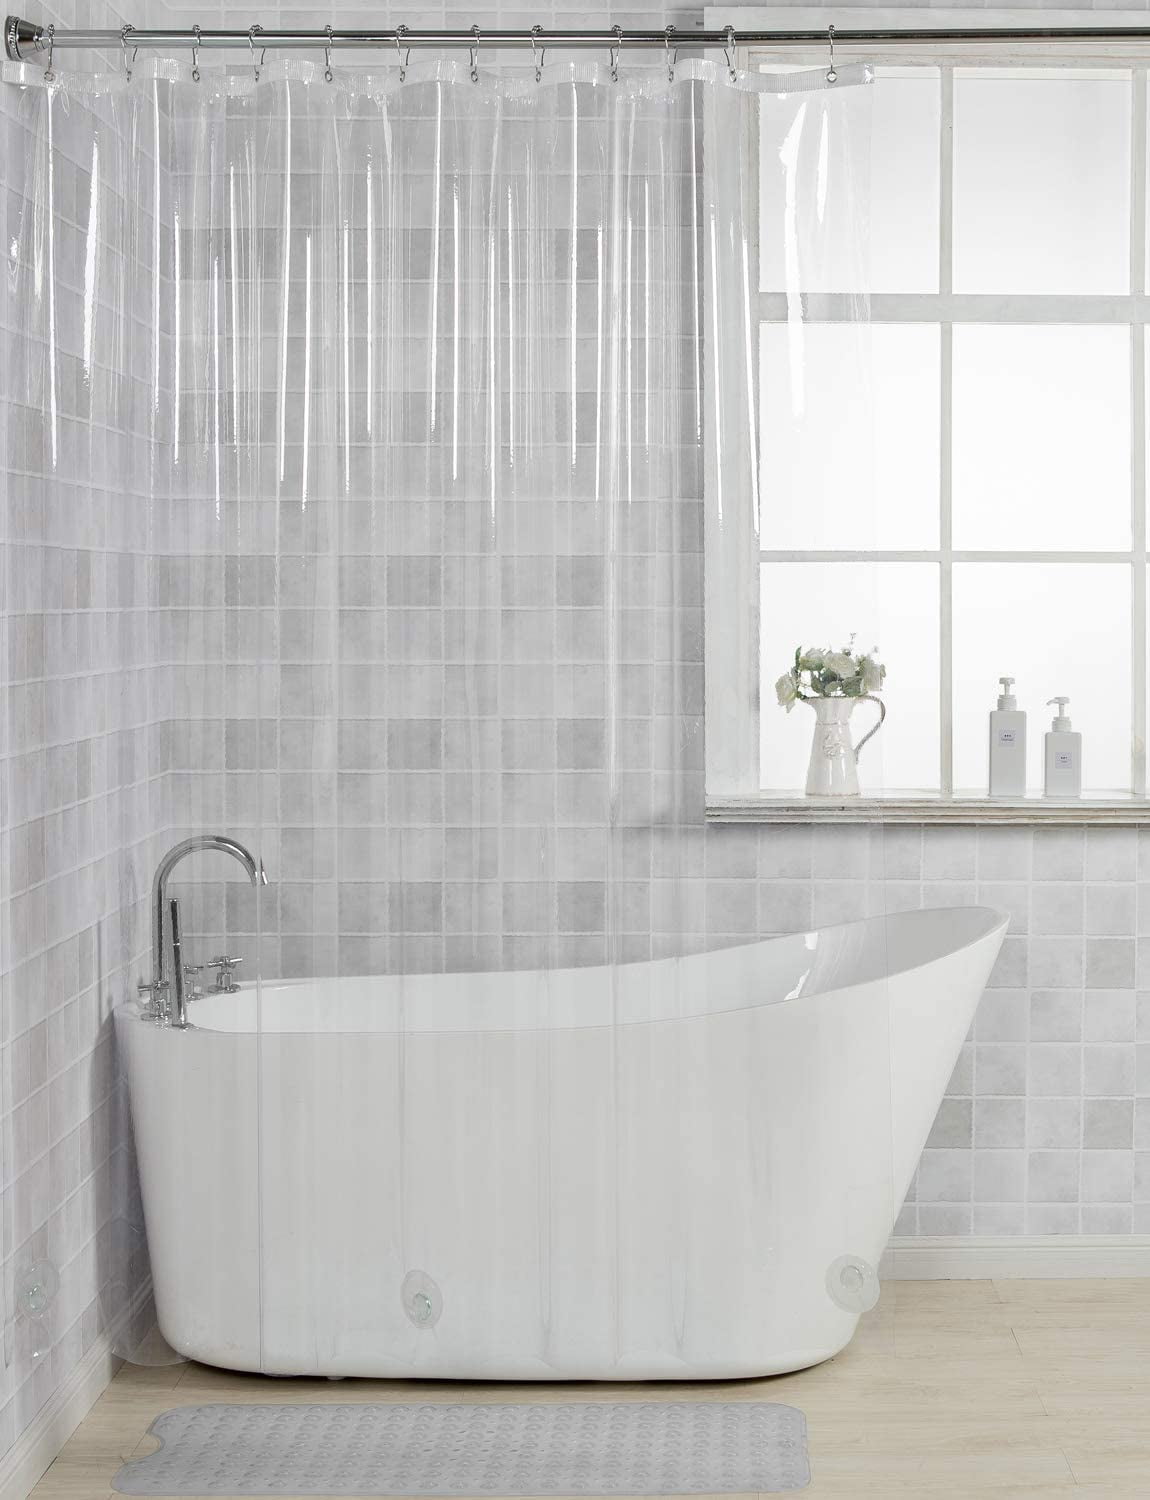 Details about   AmazerBath 12 Gauge Heavy Duty Crystal Clear Thick Shower Curtain Liner with Hea 